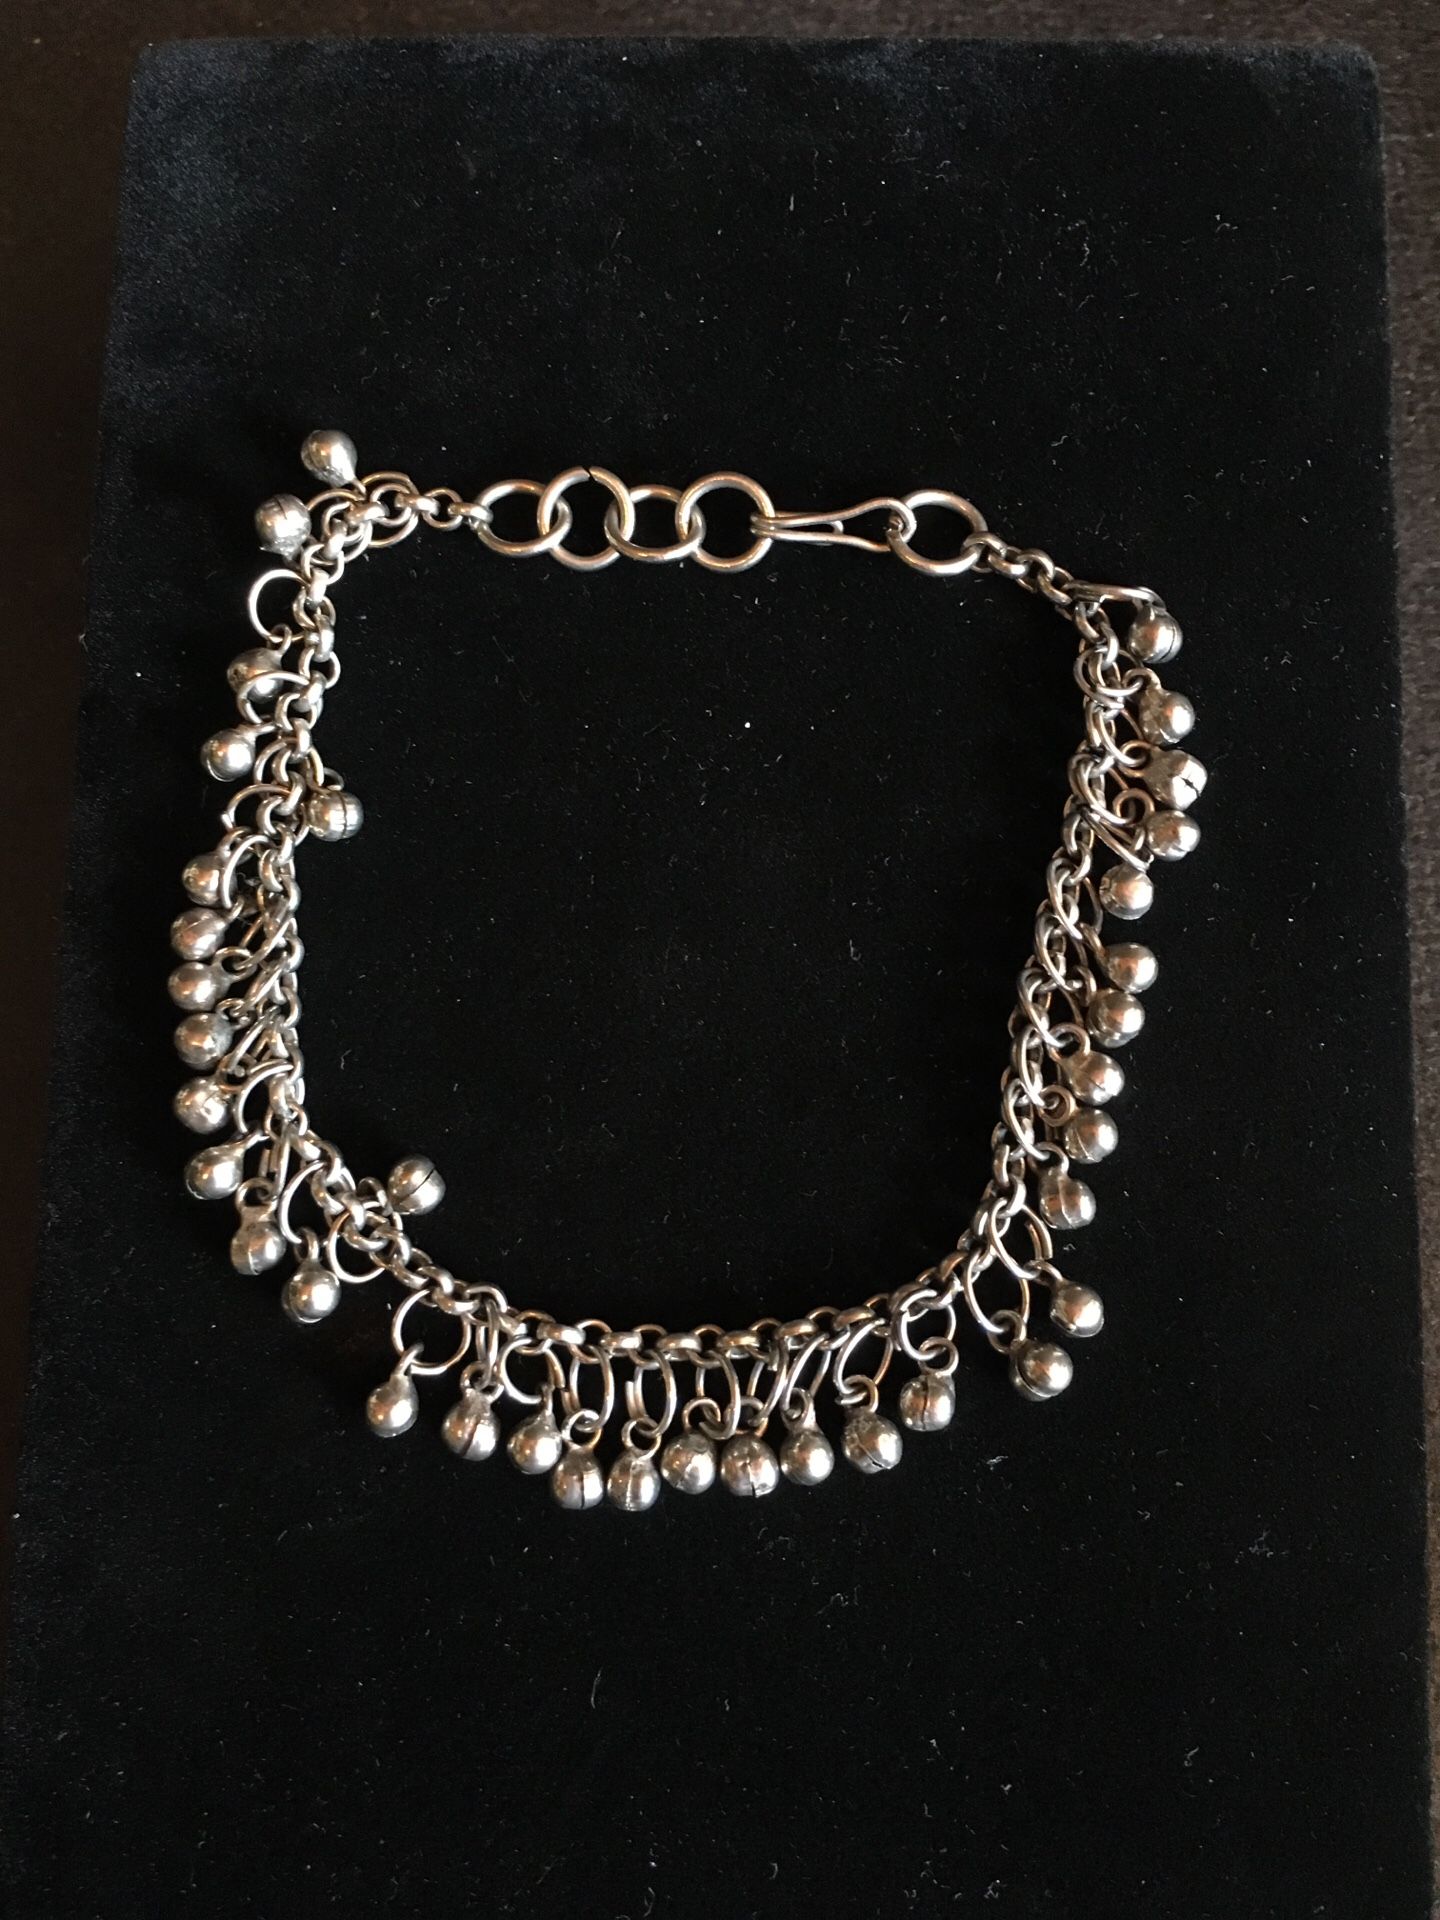 Anklet, Silvertone, with Small Bells, 10”, Indian, Missing Some Bells, unnoticeable when wearing, Nice Quality- Listing Hundreds Of Items